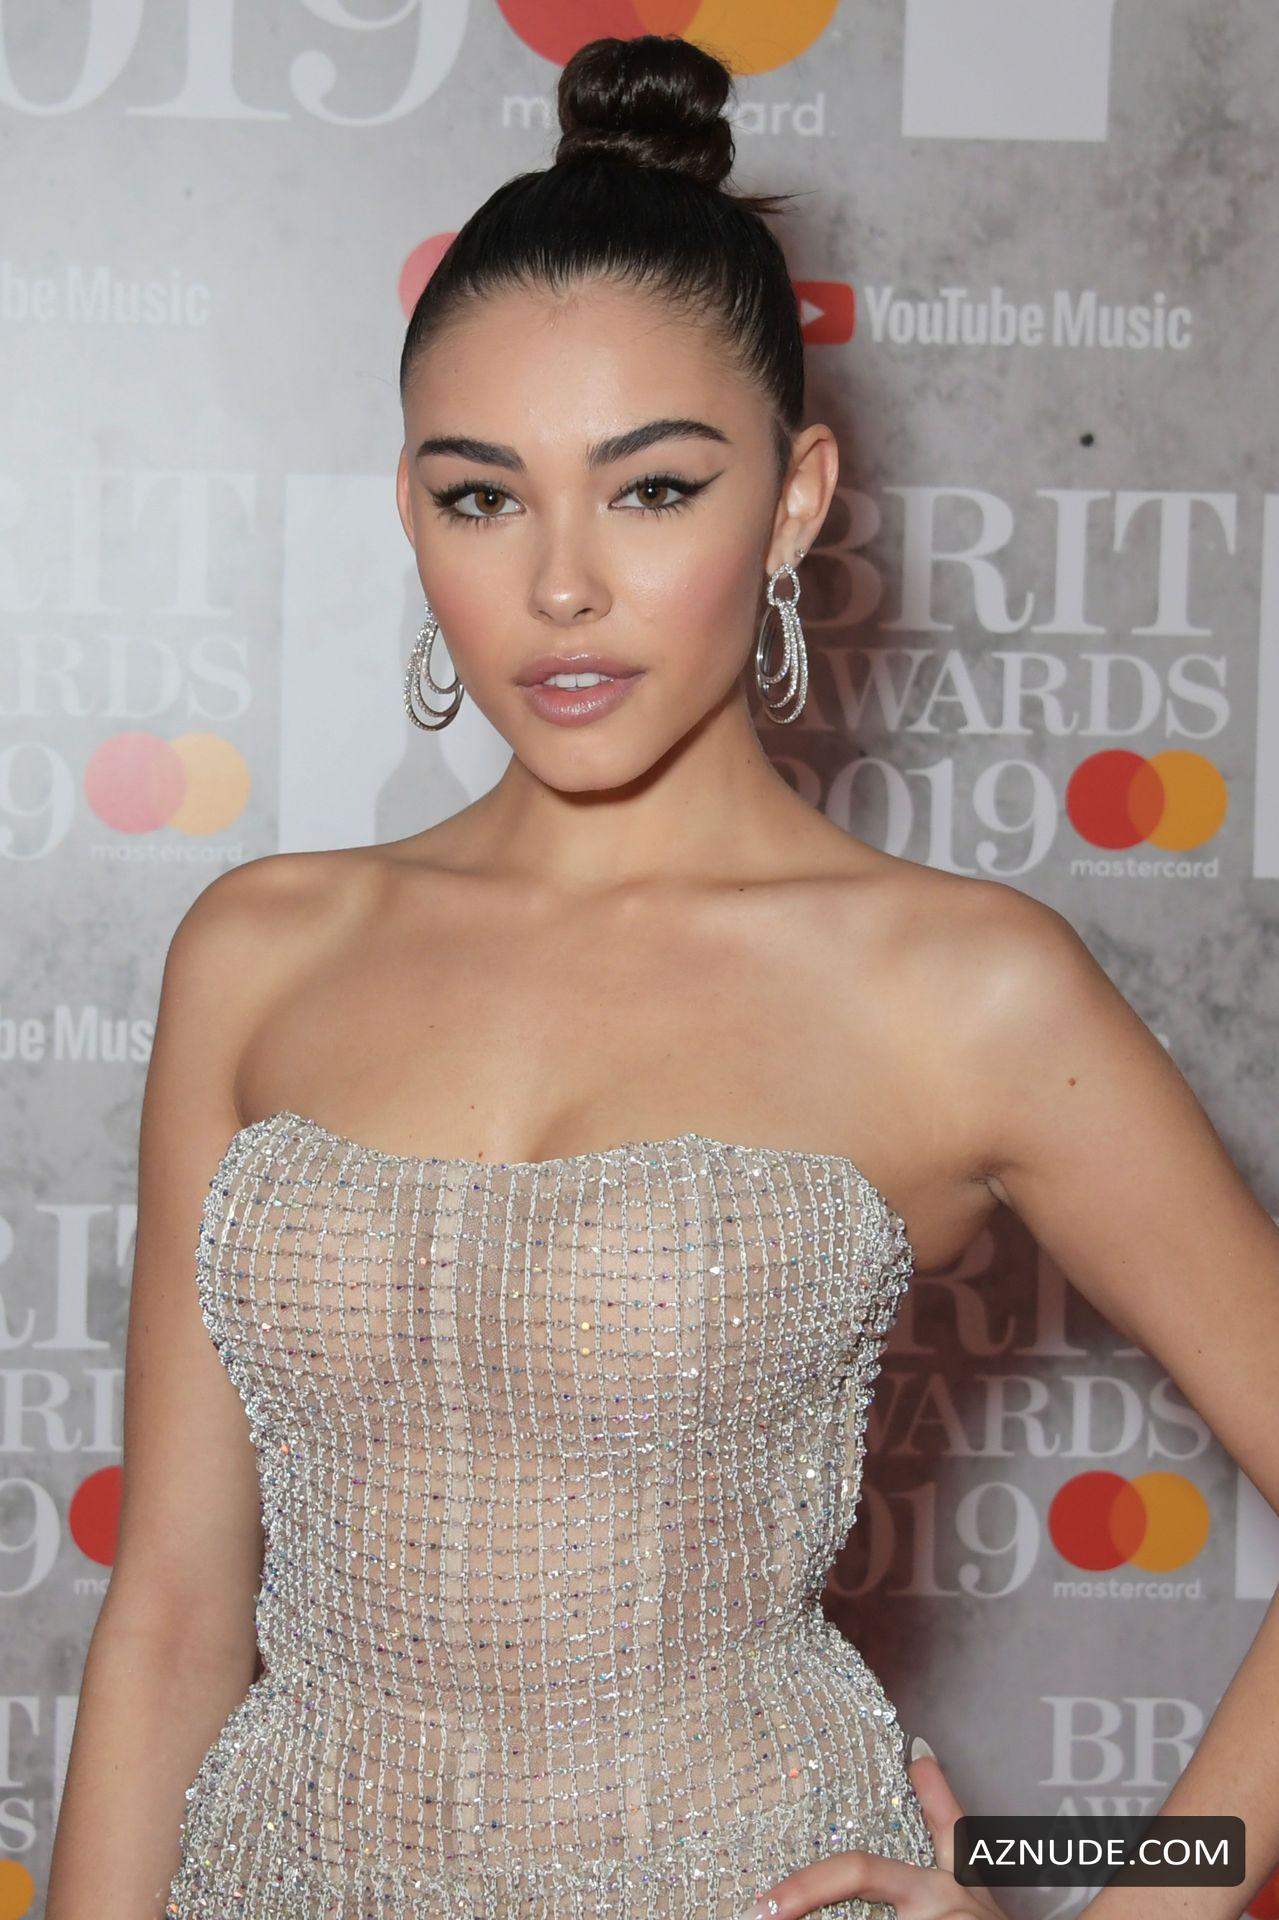 Madison Beer Sexy Attending The Brit Awards 2019 At The O2